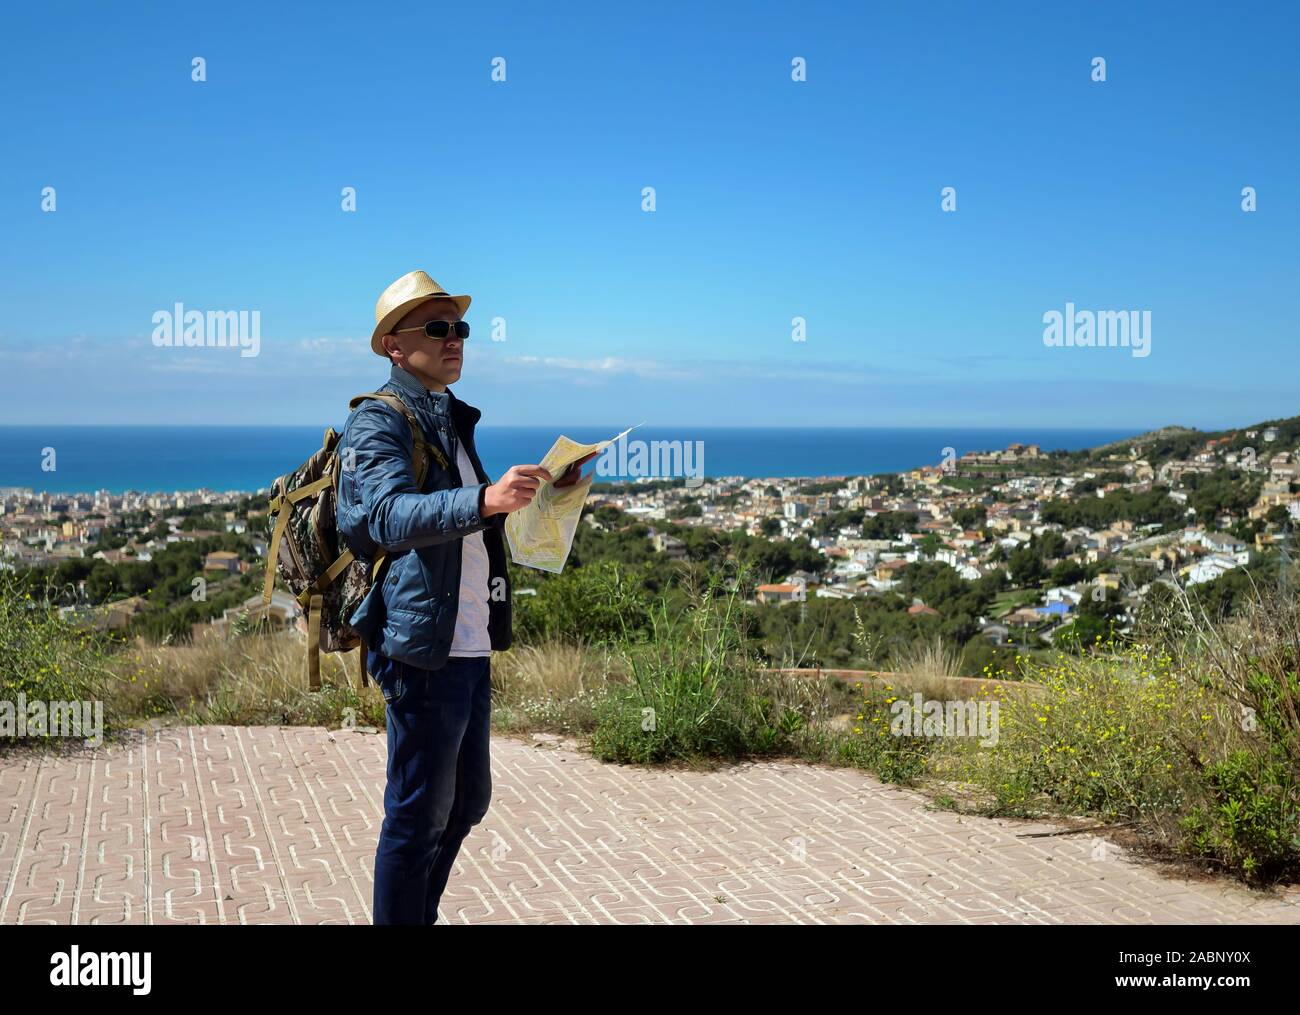 A tourist with a backpack and a map of the area in his hands stands on a mountain near the city and the sea Stock Photo